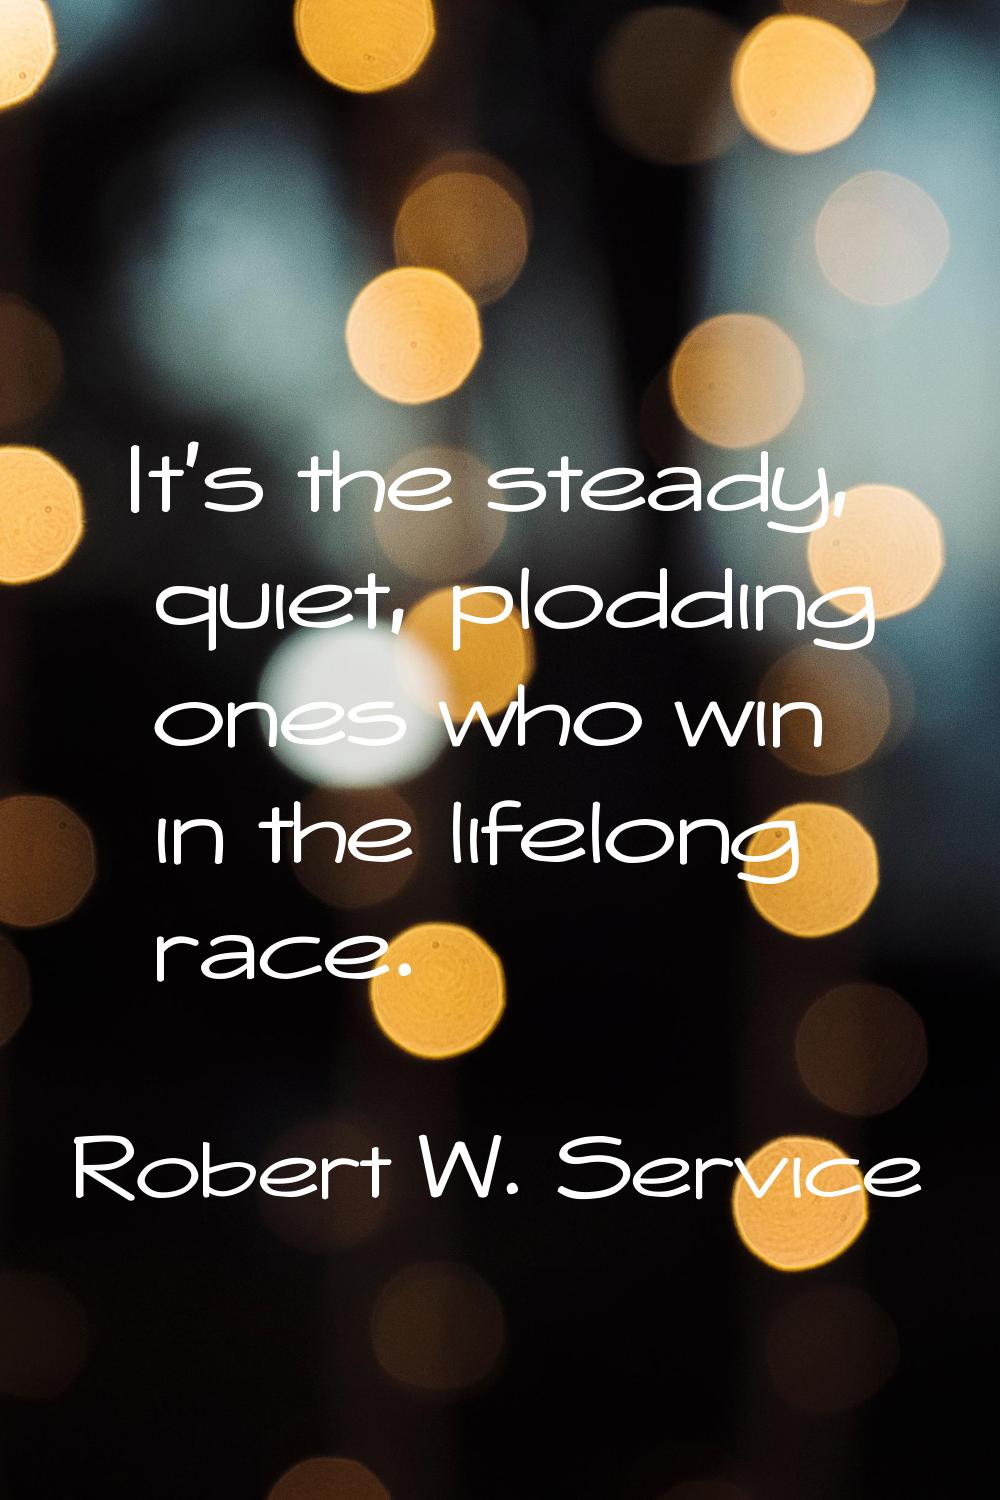 It's the steady, quiet, plodding ones who win in the lifelong race.